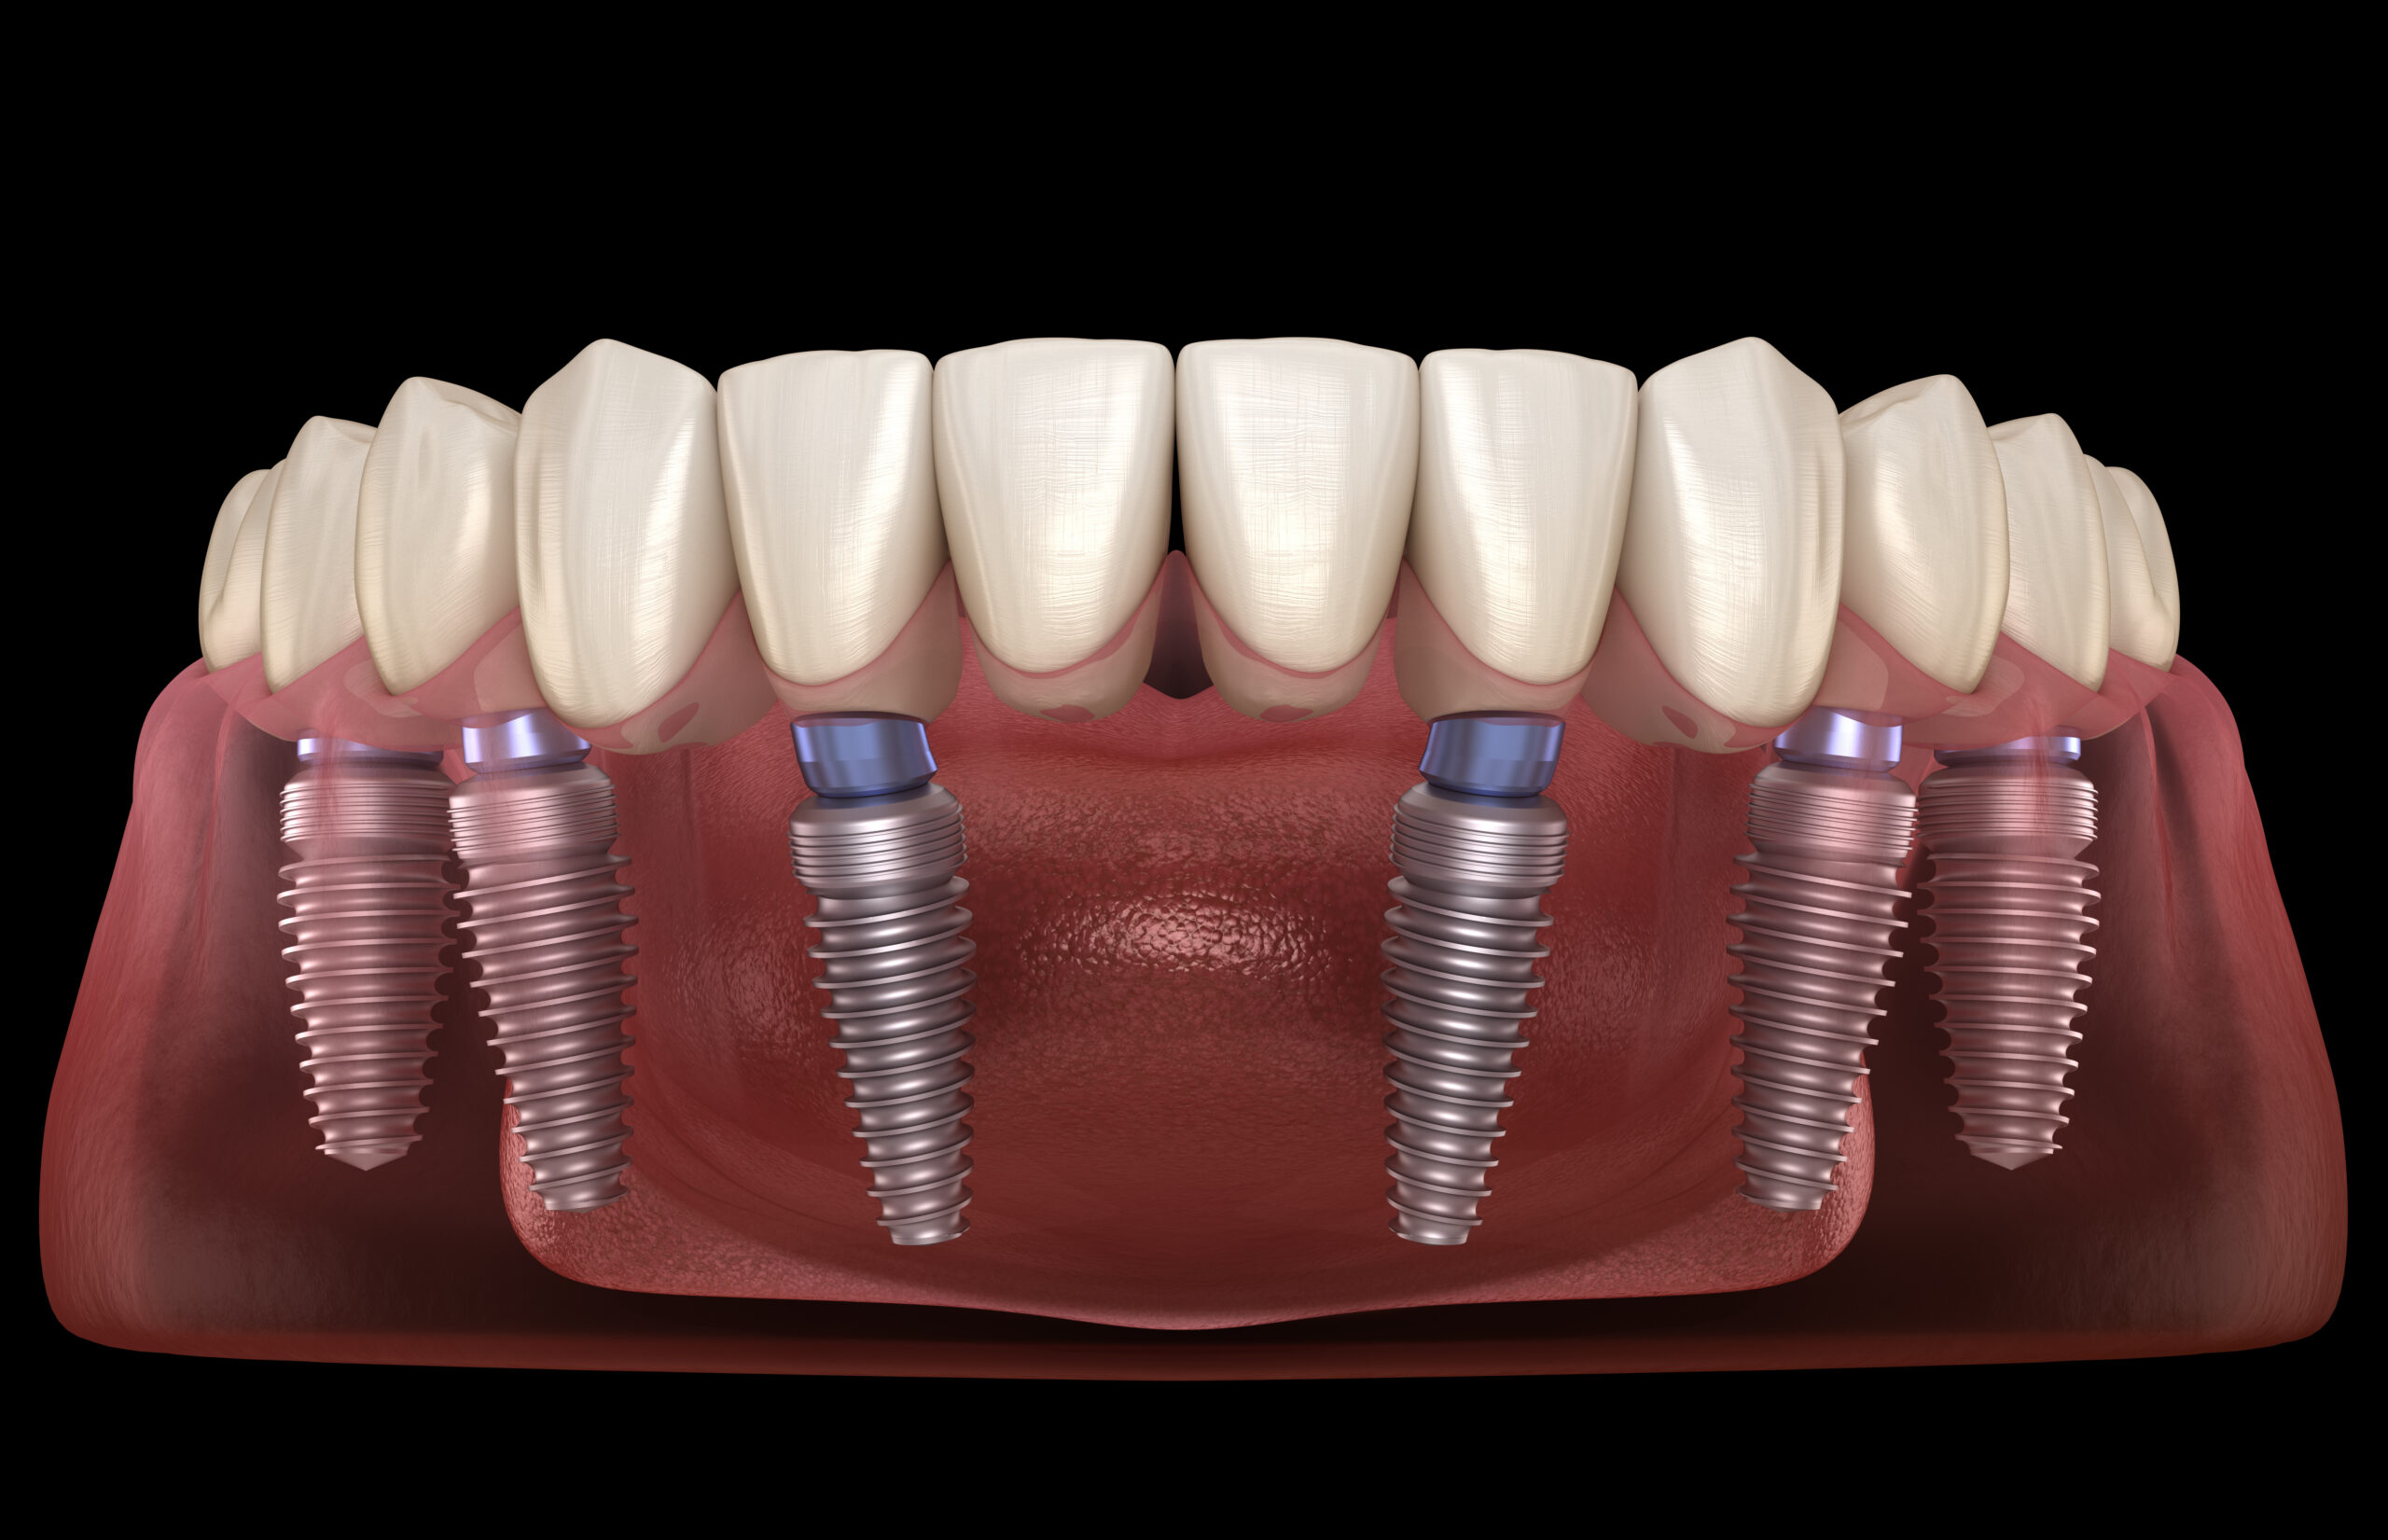 Need To Replace Your Missing Teeth? Here Is How All-On-6 Dental Implants Can Benefit You!